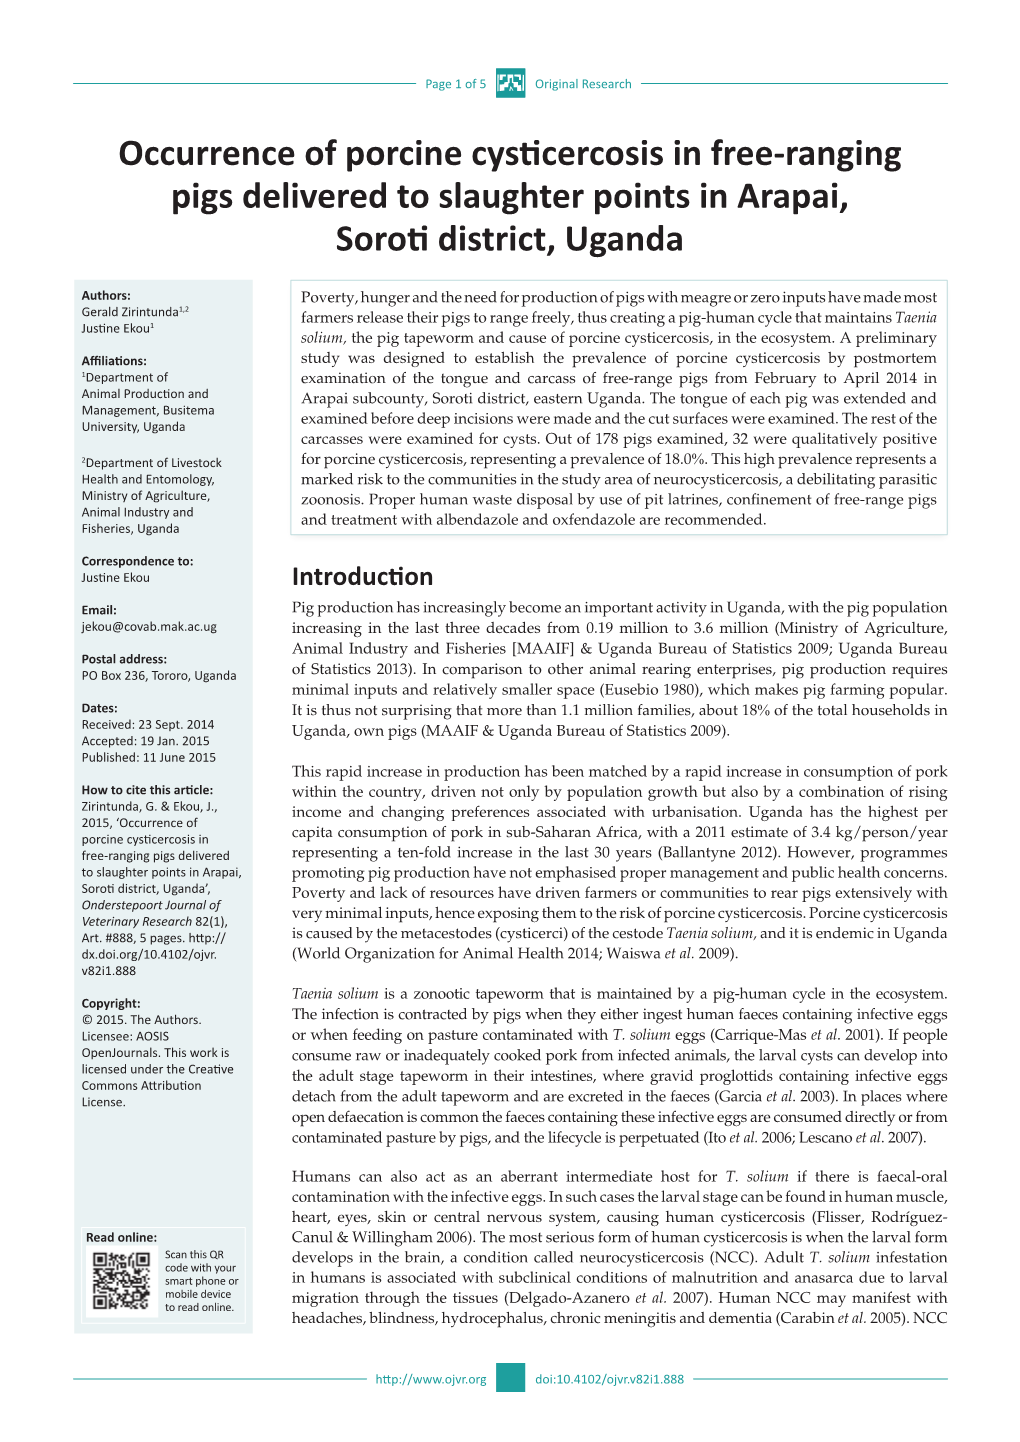 Occurrence of Porcine Cysticercosis in Free-Ranging Pigs Delivered to Slaughter Points in Arapai, Soroti District, Uganda